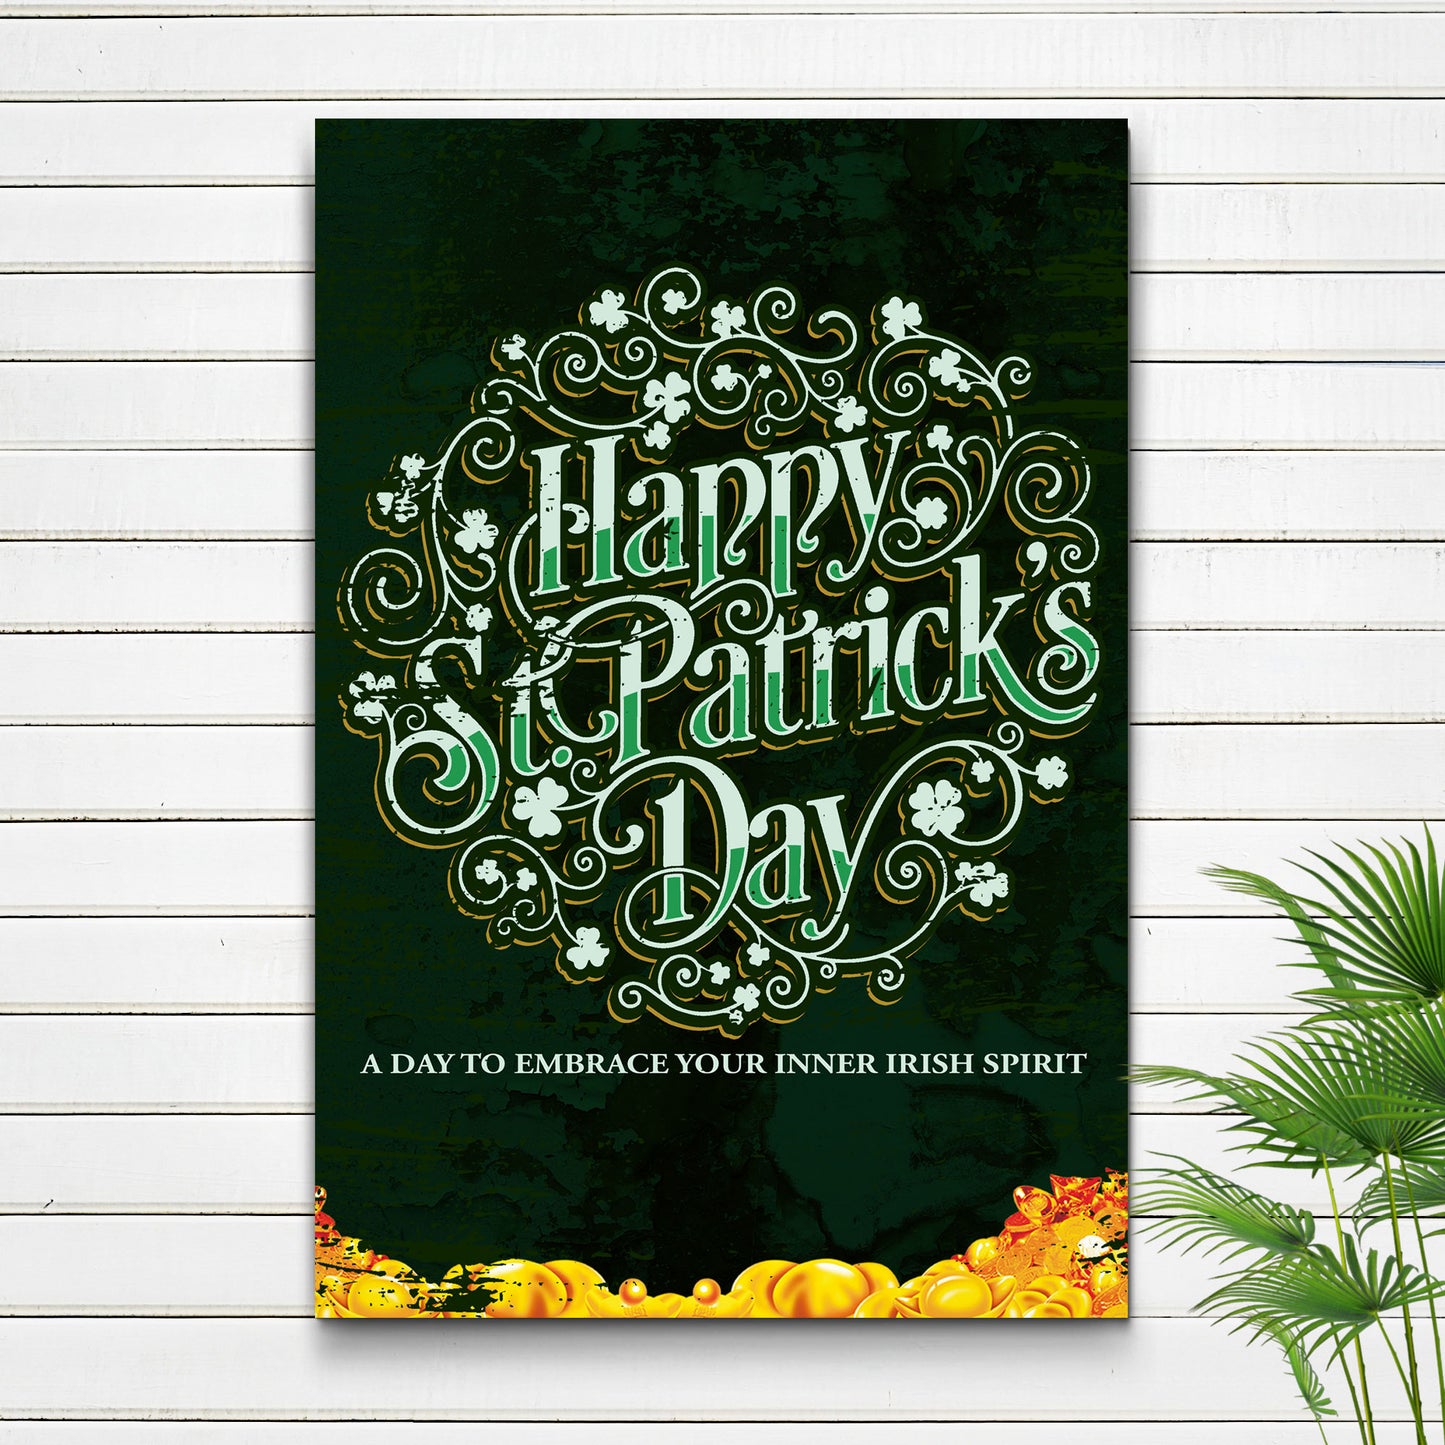 St. Patrick's Day, A Day To Embrace Your Inner Irish Spirit Sign Style 1 - Image by Tailored Canvases